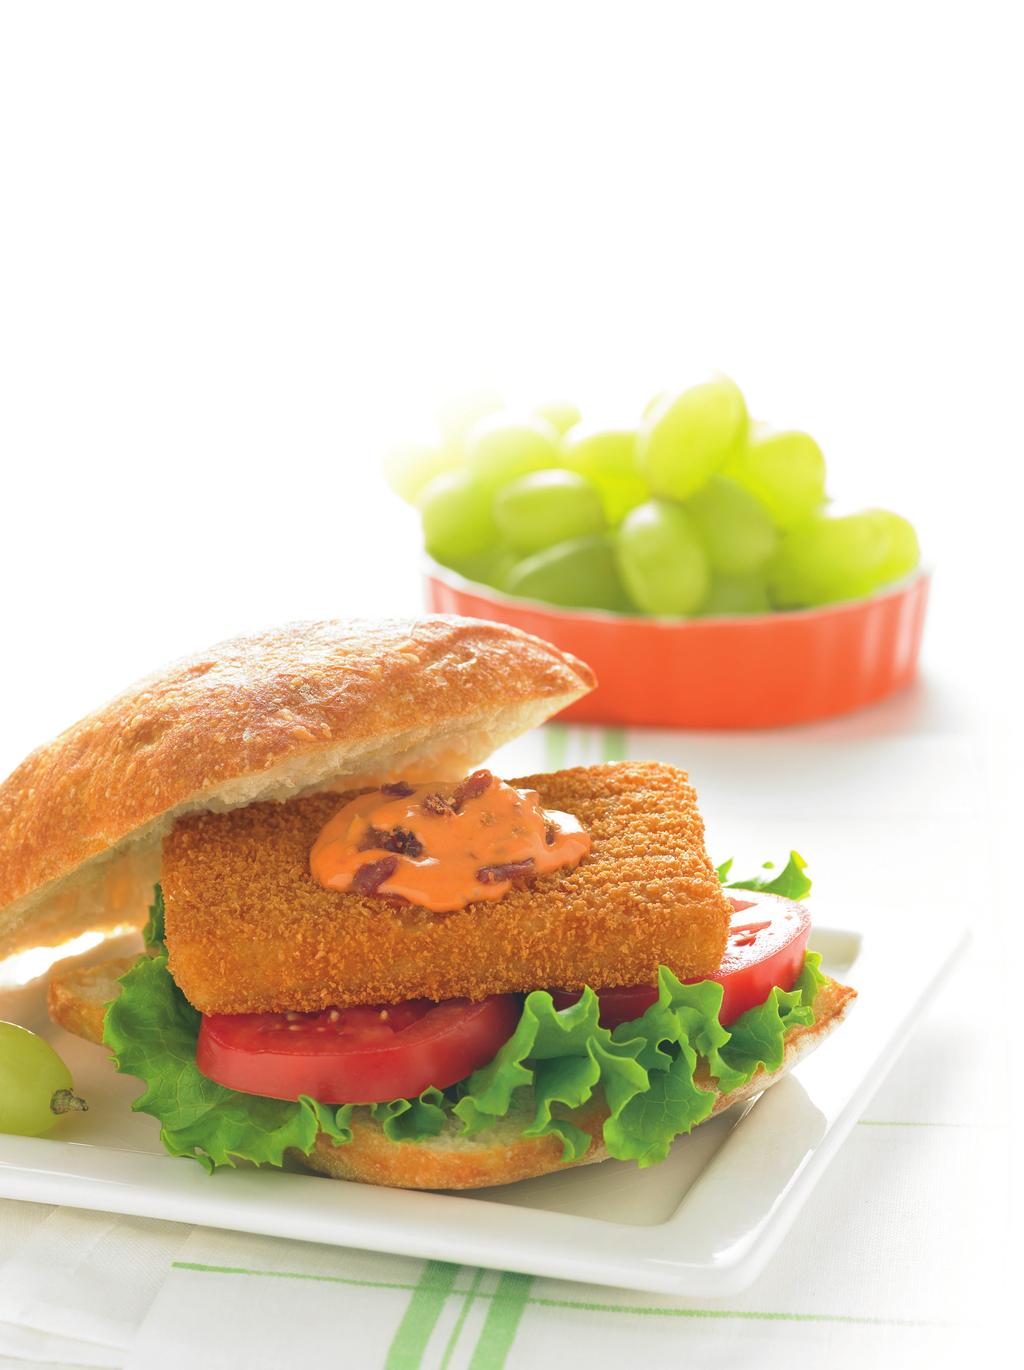 Ciabatta FBLT (Fish, Bacon, Lettuce & Tomato) Nutrition Facts Ciabatta FBLT Quantity 1 Calories 601 Total Fat 17.3g Saturated Fat 1.4g Trans Fat 0g Cholesterol 26mg Sodium 1126mg Carbohydrates 86.